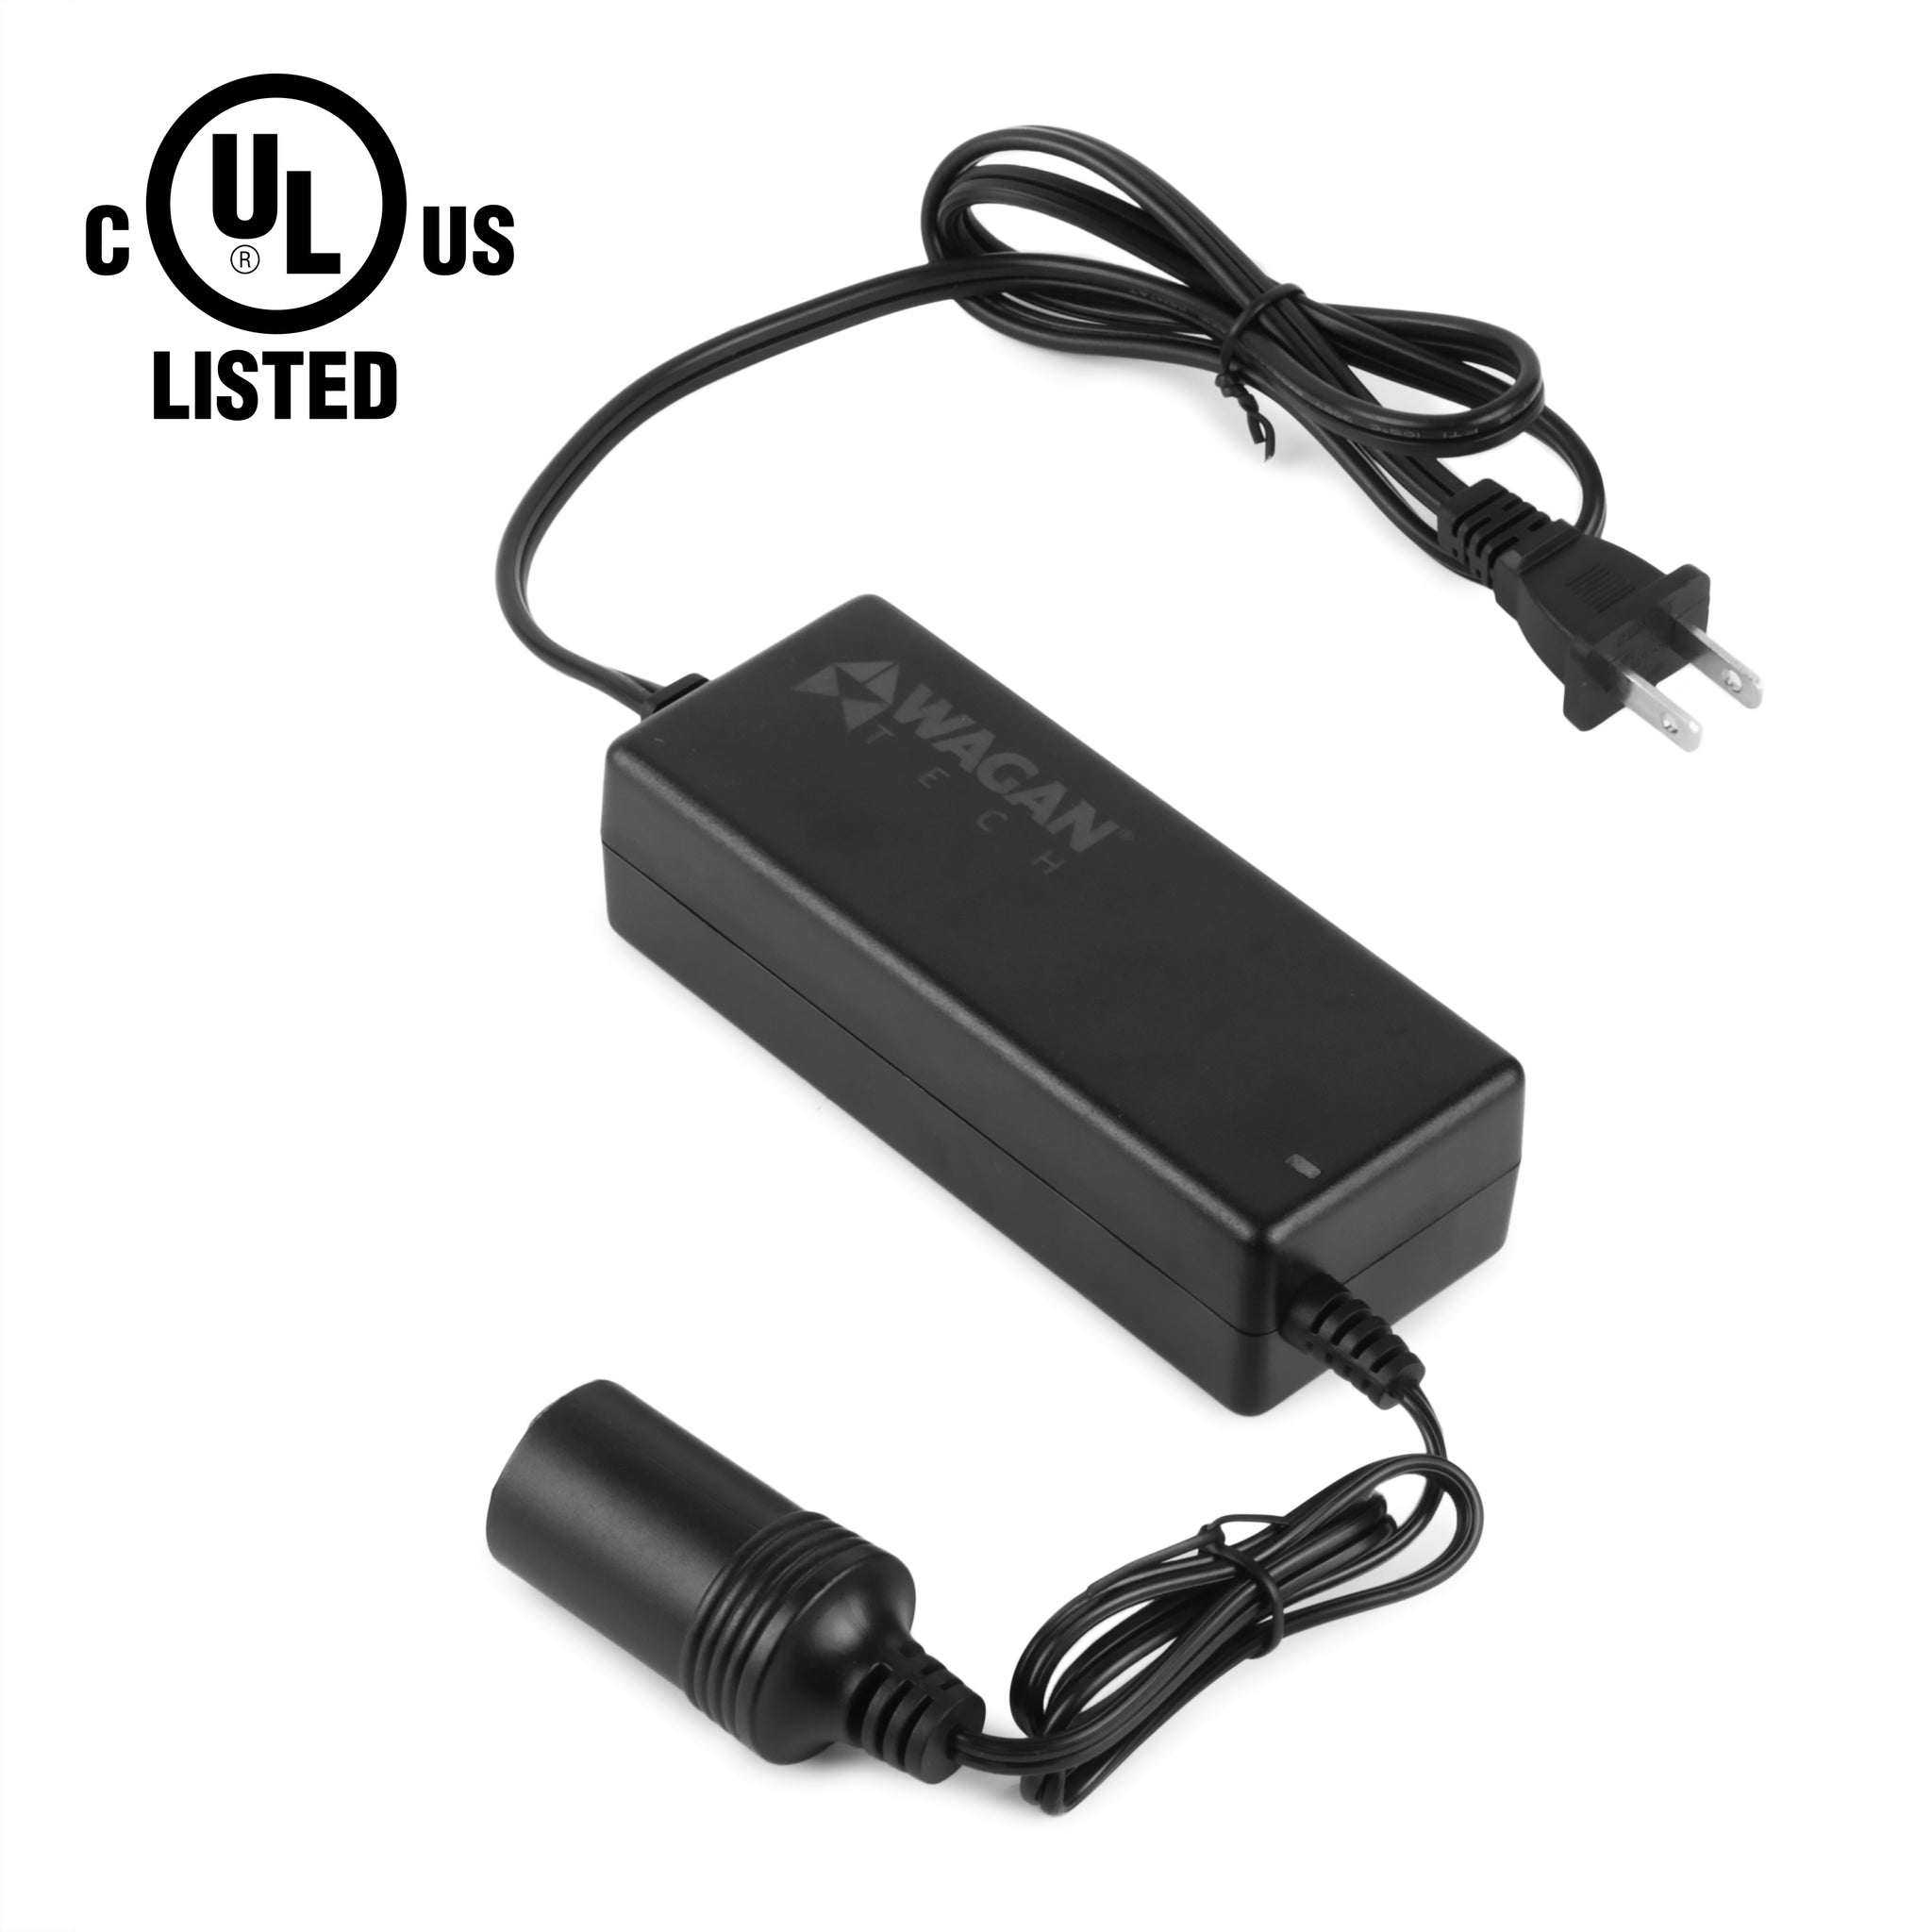 Wagan 9903 AC to DC 5 Amp Power Adapter